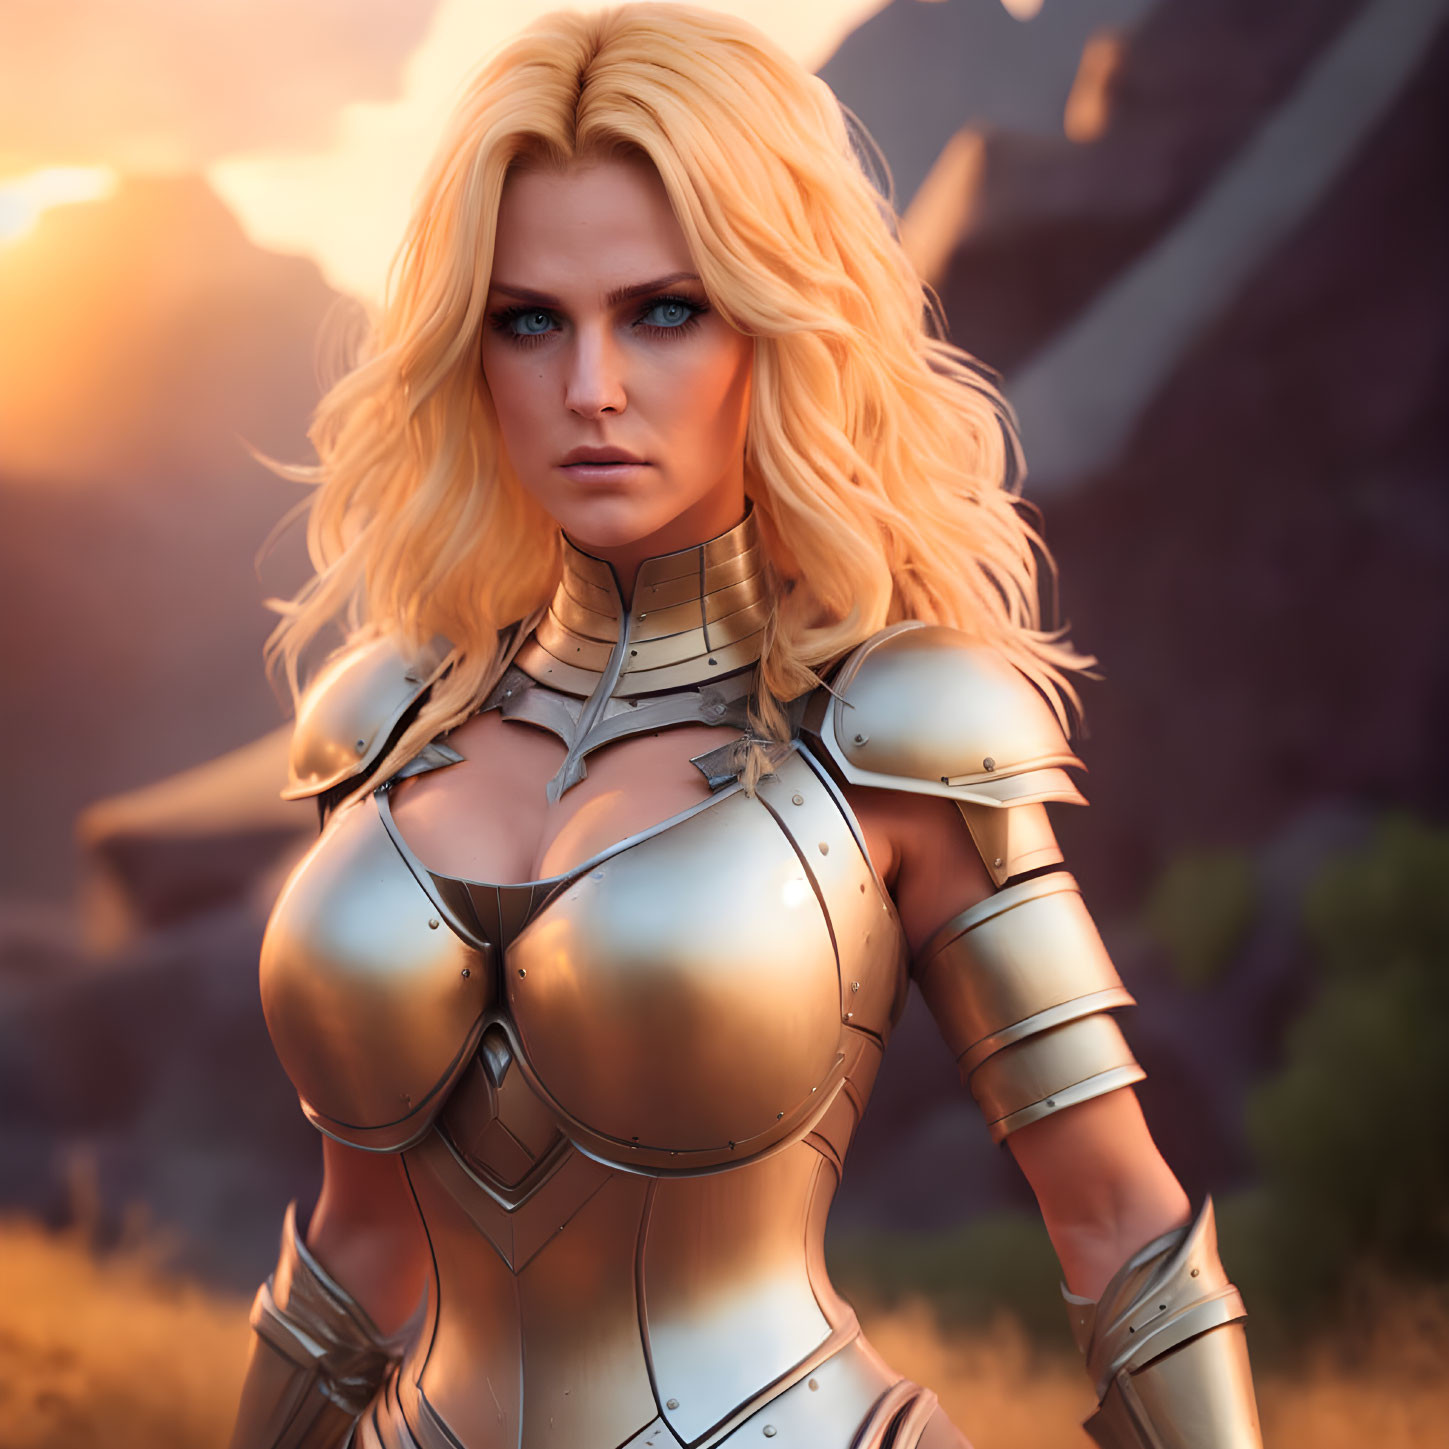 Blonde warrior woman in silver armor with sunset landscape